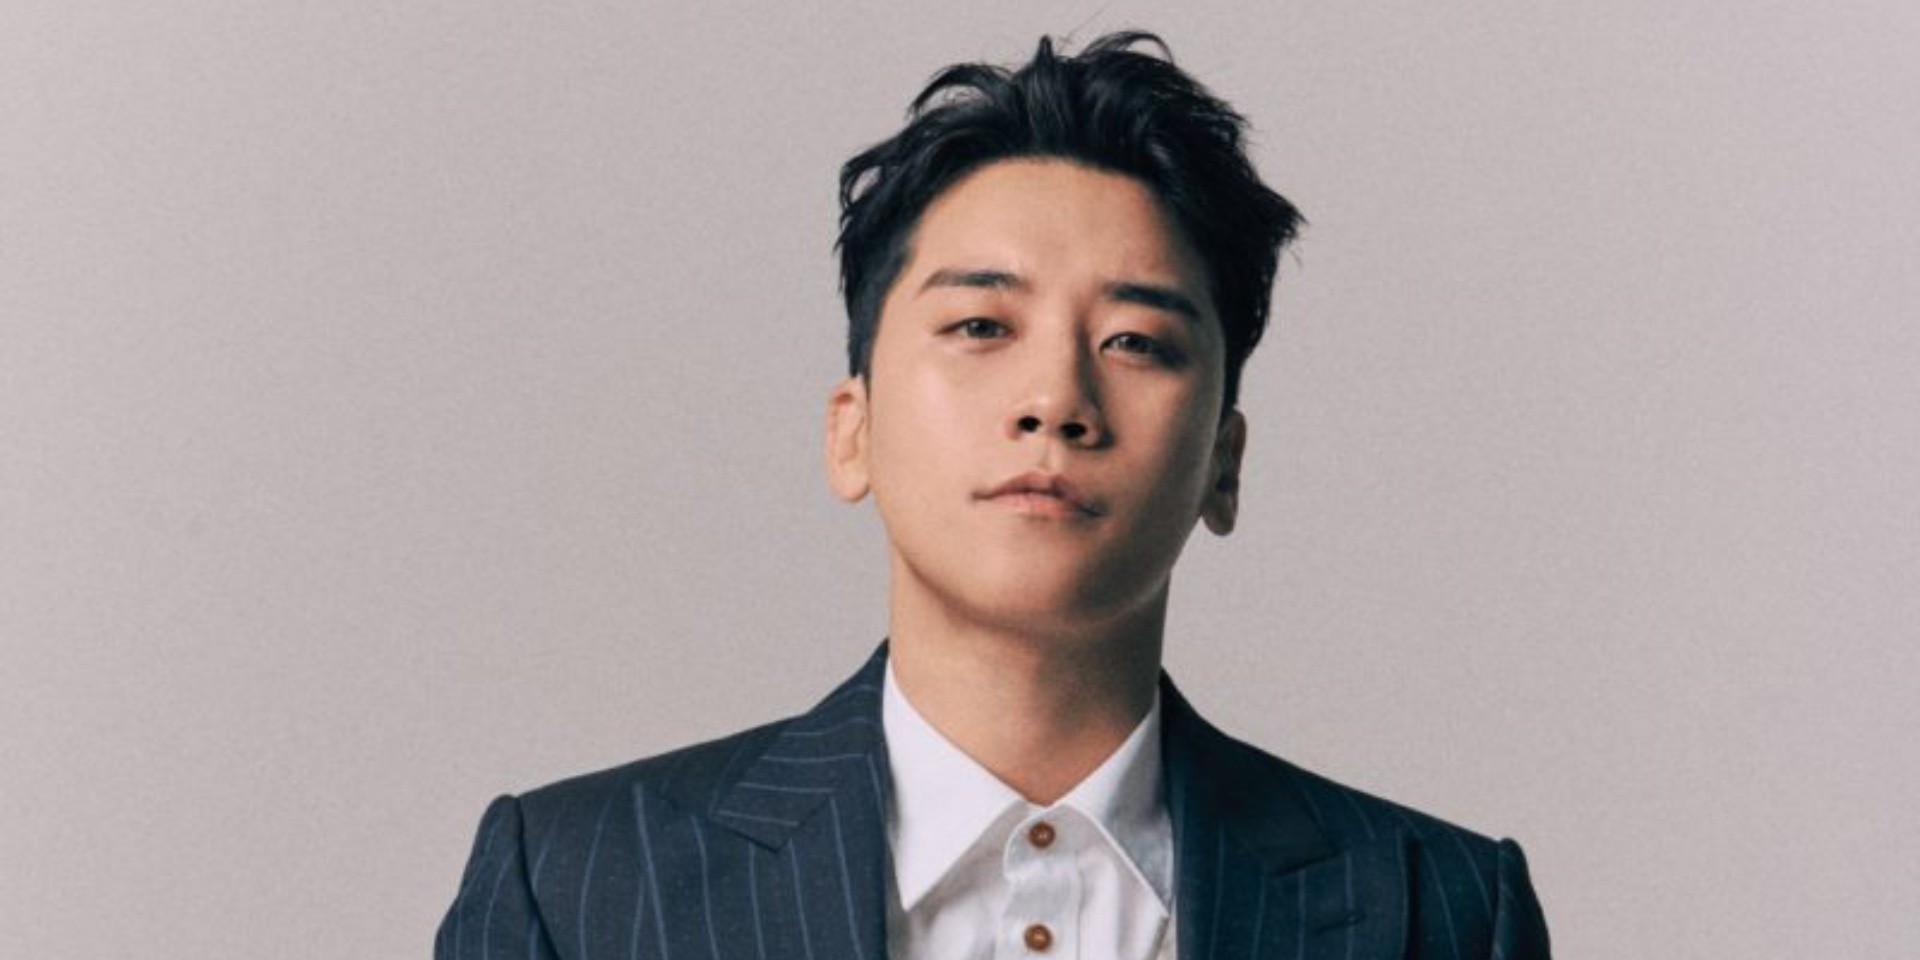 BIGBANG's Seungri announces The Great Seungri Tour 2019 in Asia — stops in Singapore and Hong Kong confirmed